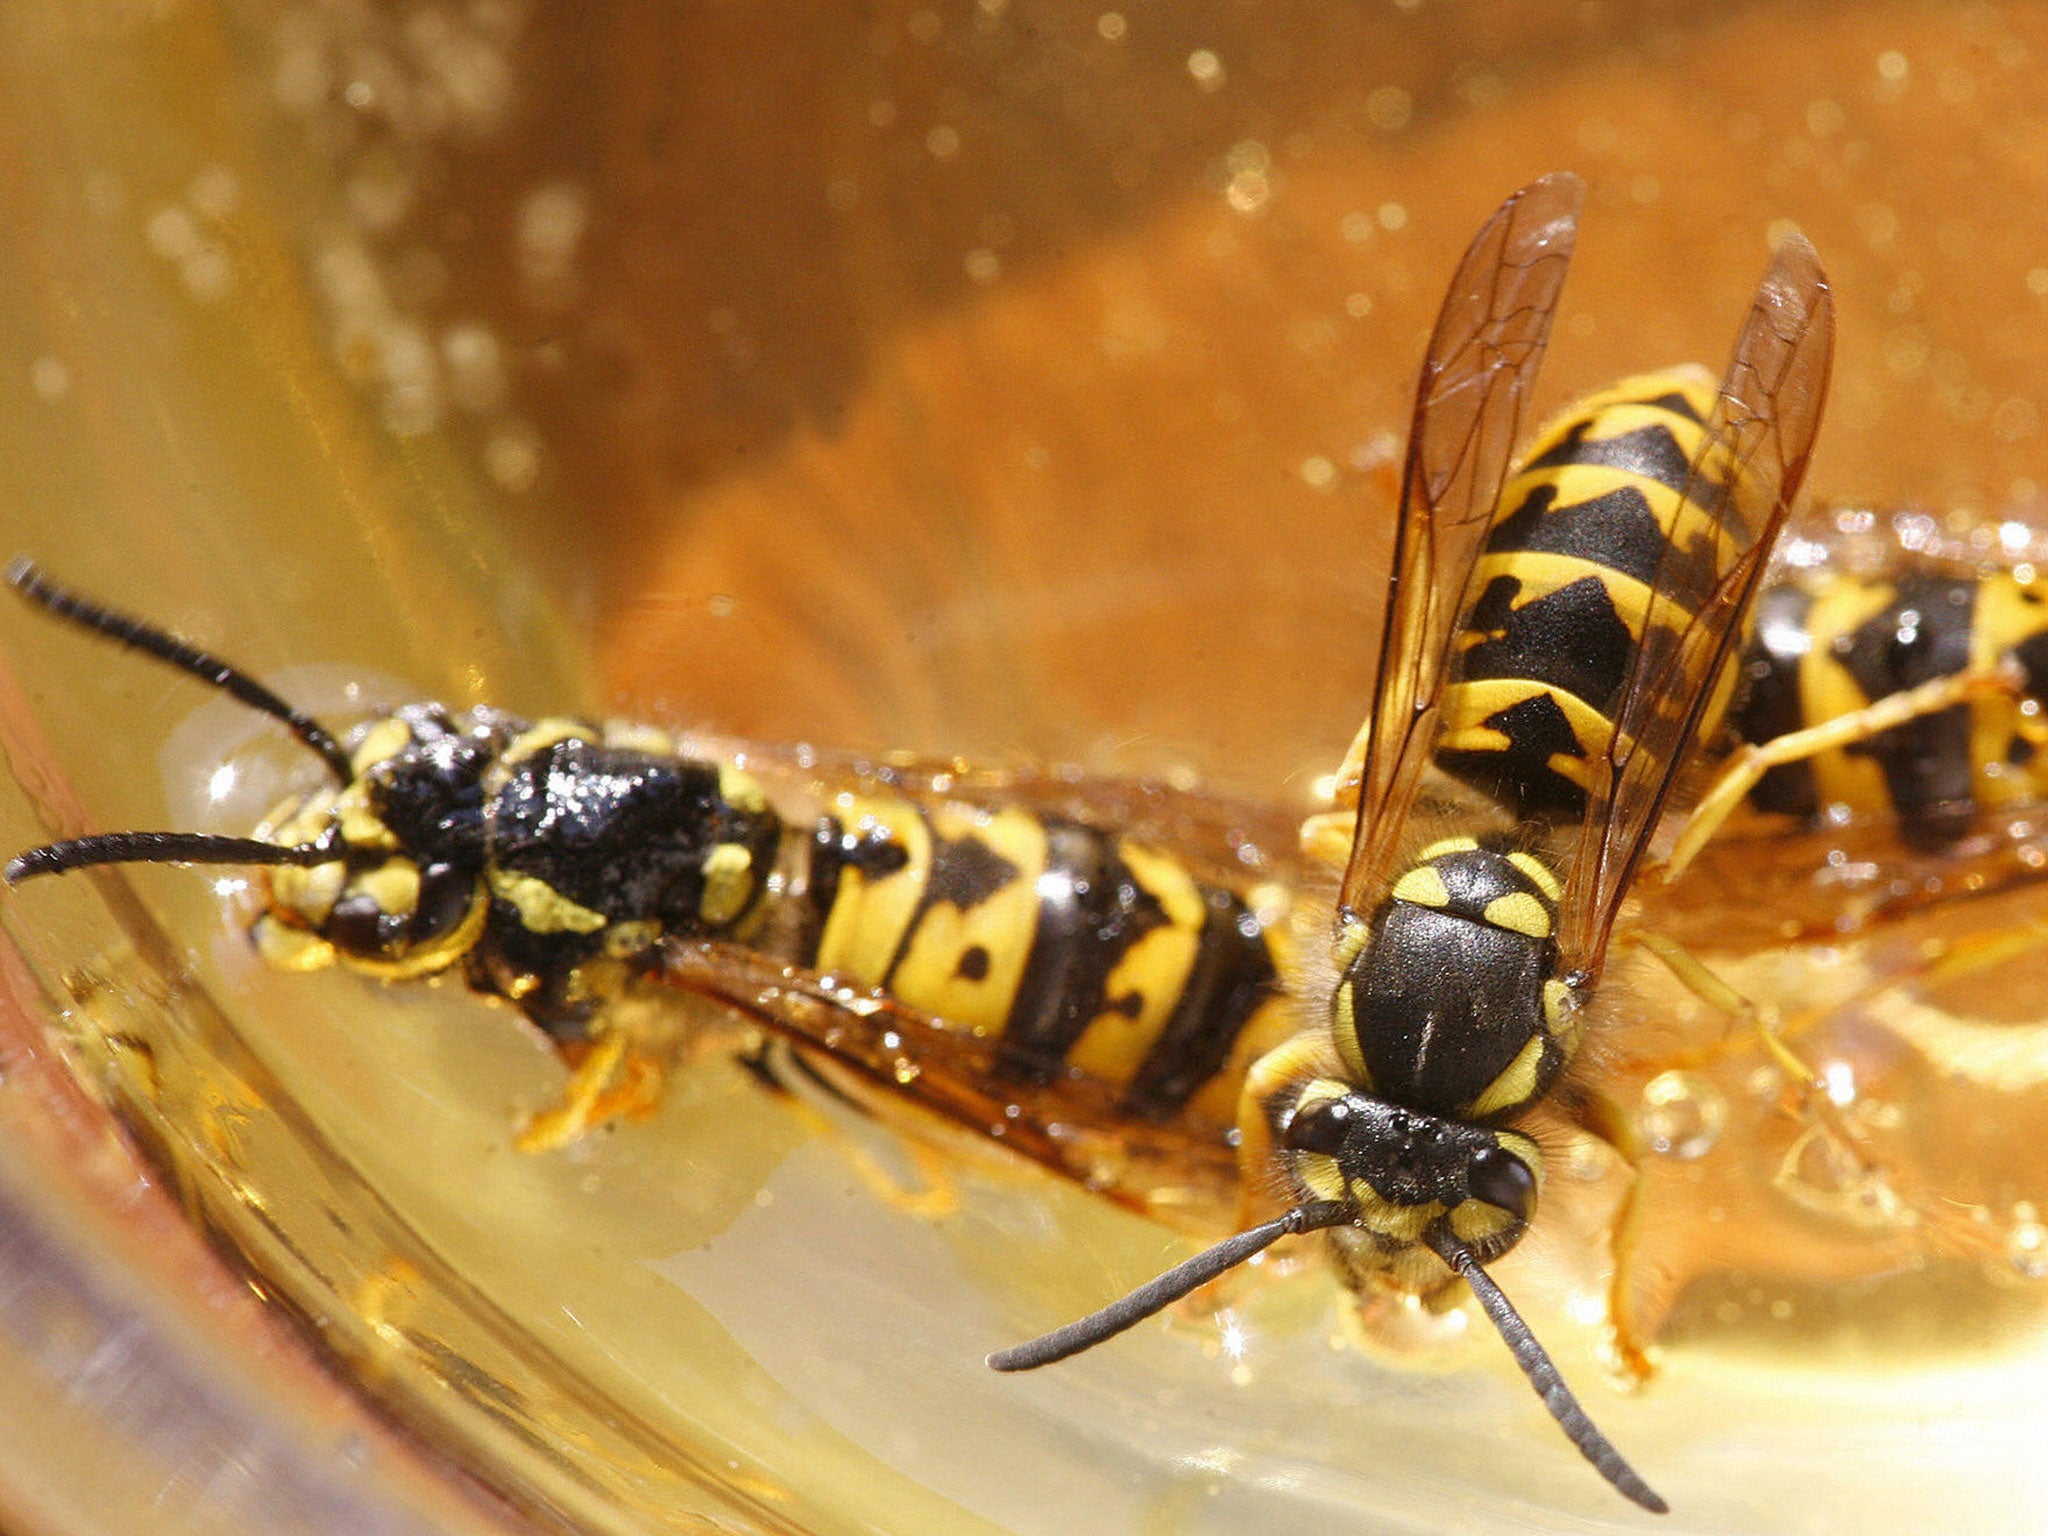 Wasps have plunged into a glass of honey, 18 September 2006 in Hohen Neuendorf in Brandenburg, near Berlin. These insects, who have a venomous stinger, spread out in summer.